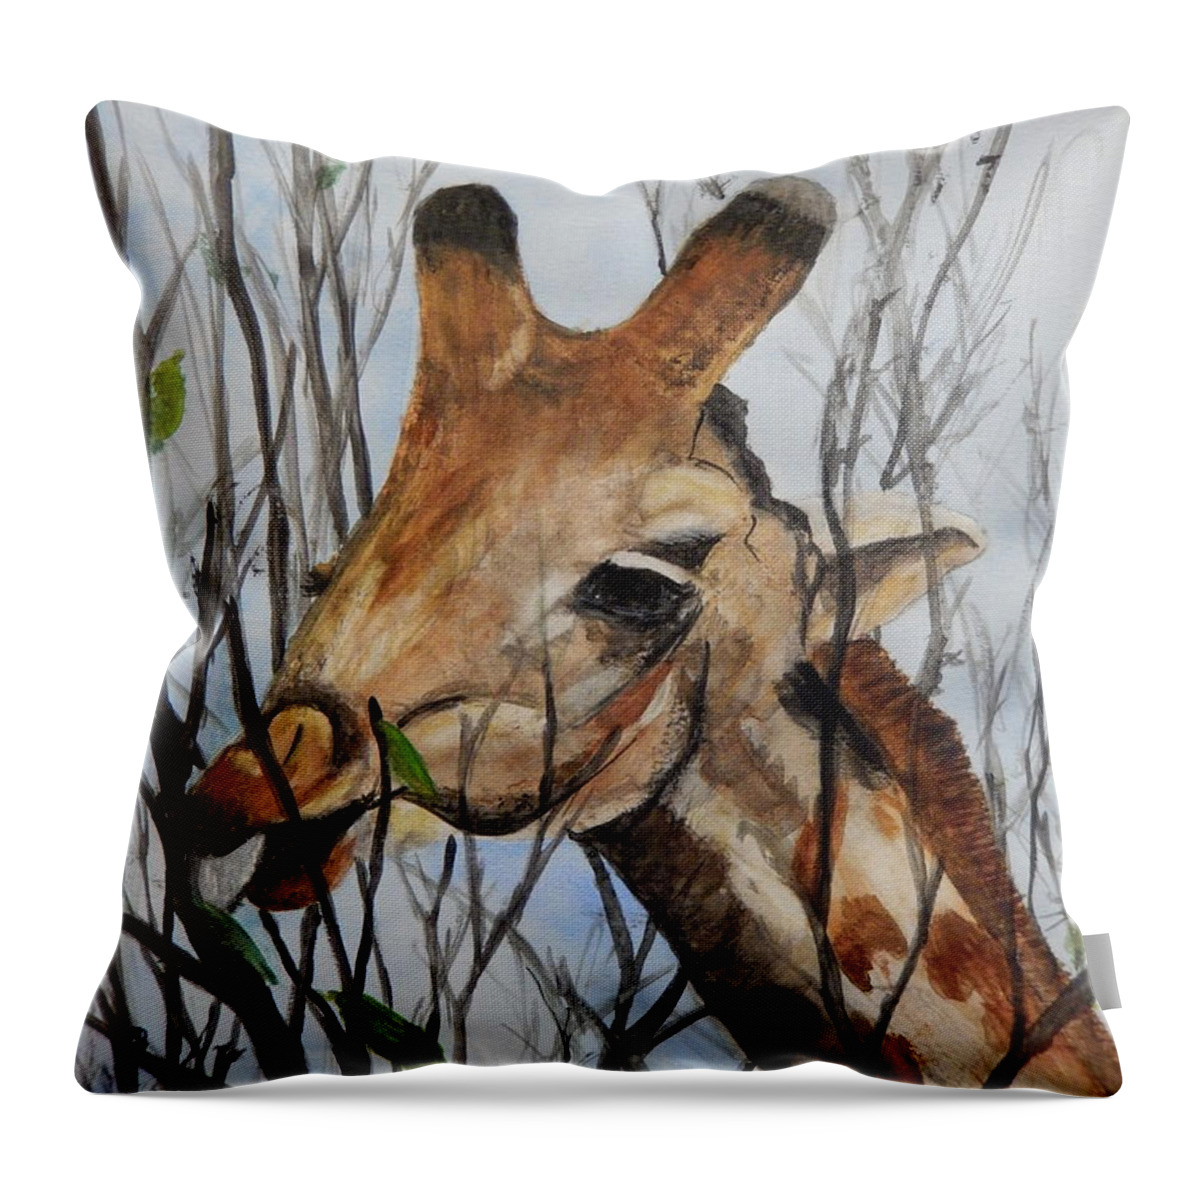 Animal Throw Pillow featuring the painting Stretch by Betty-Anne McDonald